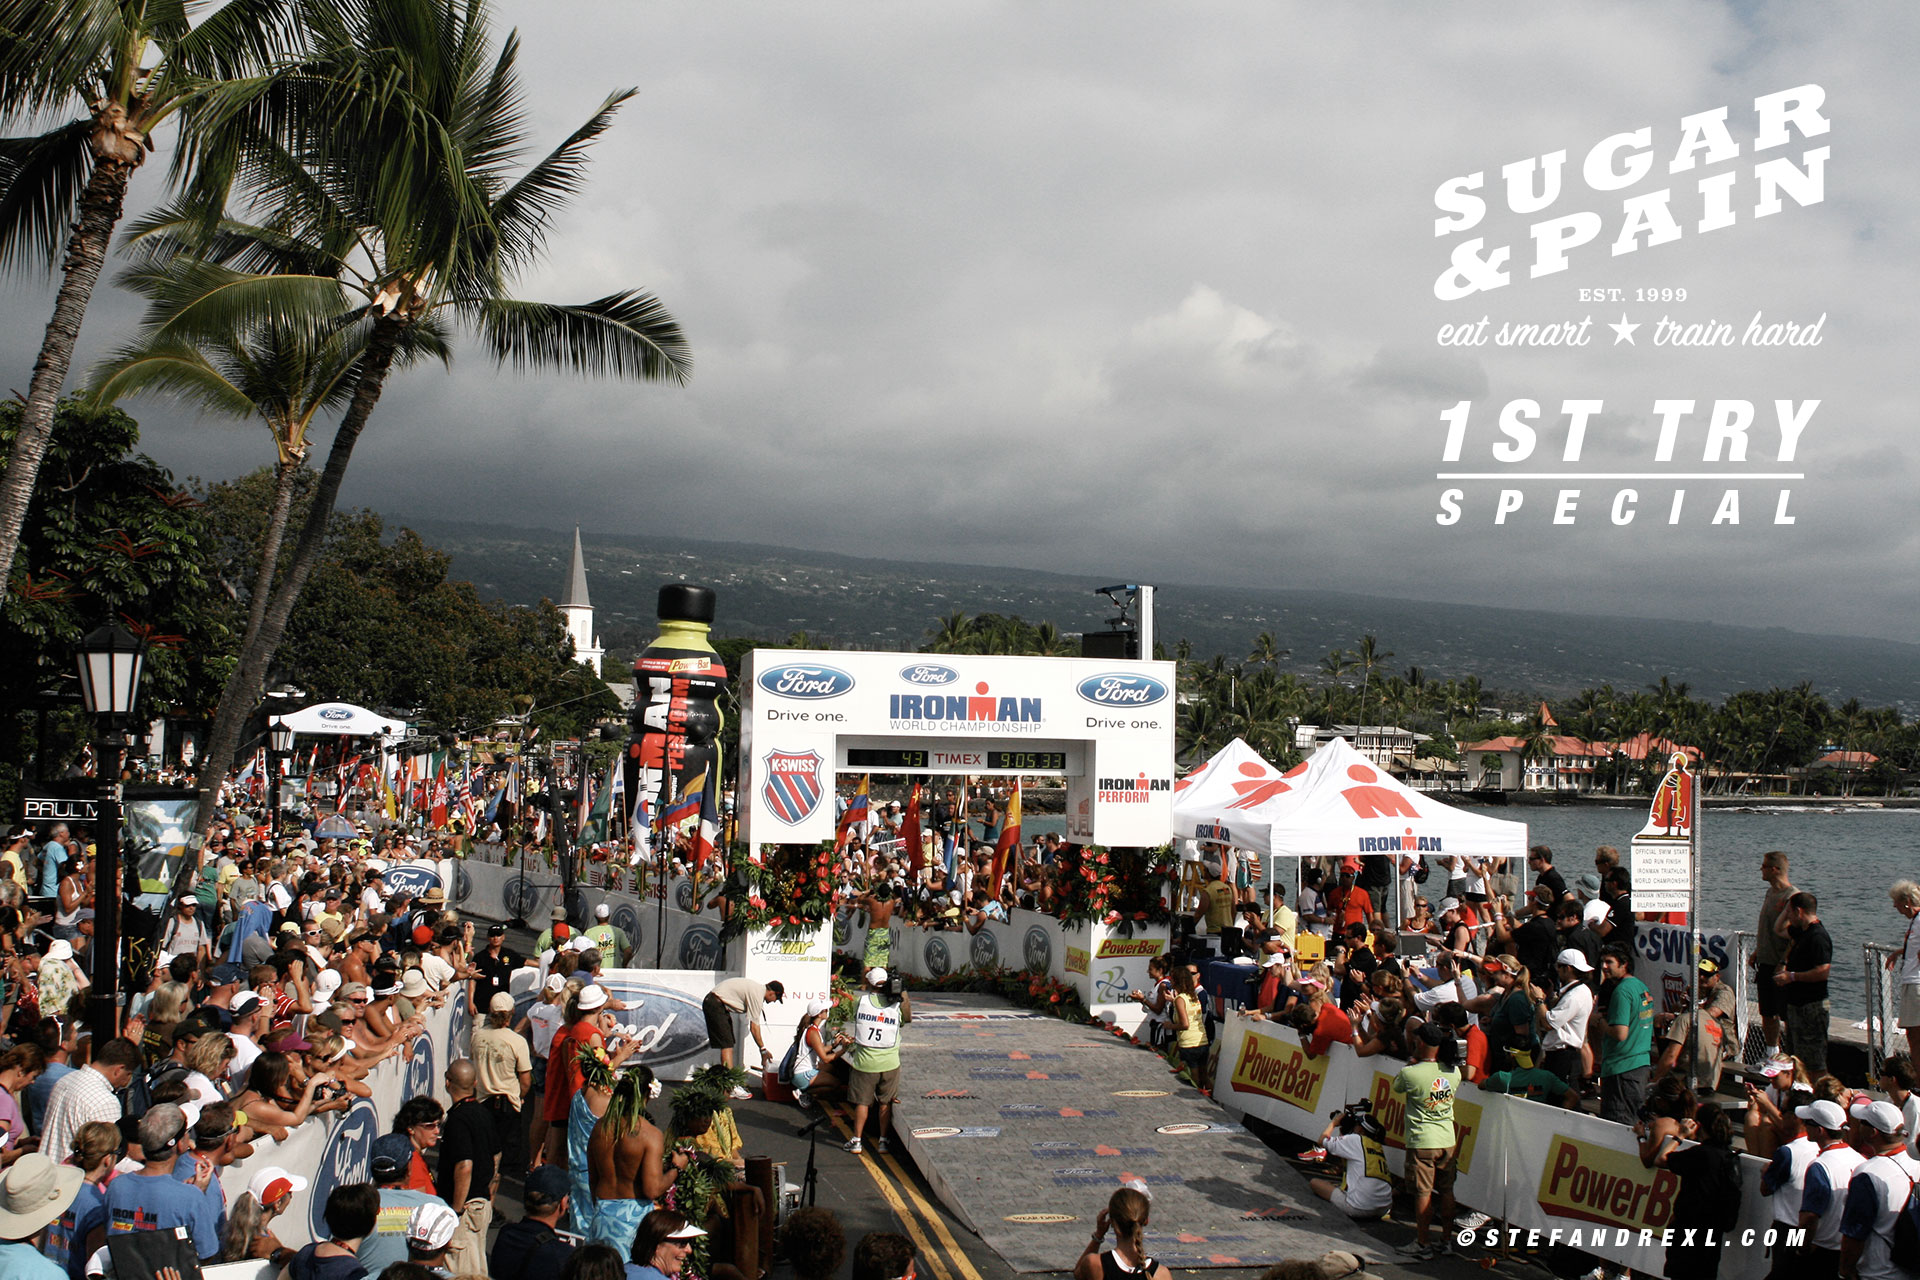 SUGAR & PAIN COACHING 1ST TRY Special 50FIFTY Season Starter / Your next triathlon season campaign could start now here and might finish one time there – the Finishline of Ironman Hawaii on Ali'i Drive of Kailua Kona © stefandrexl.com